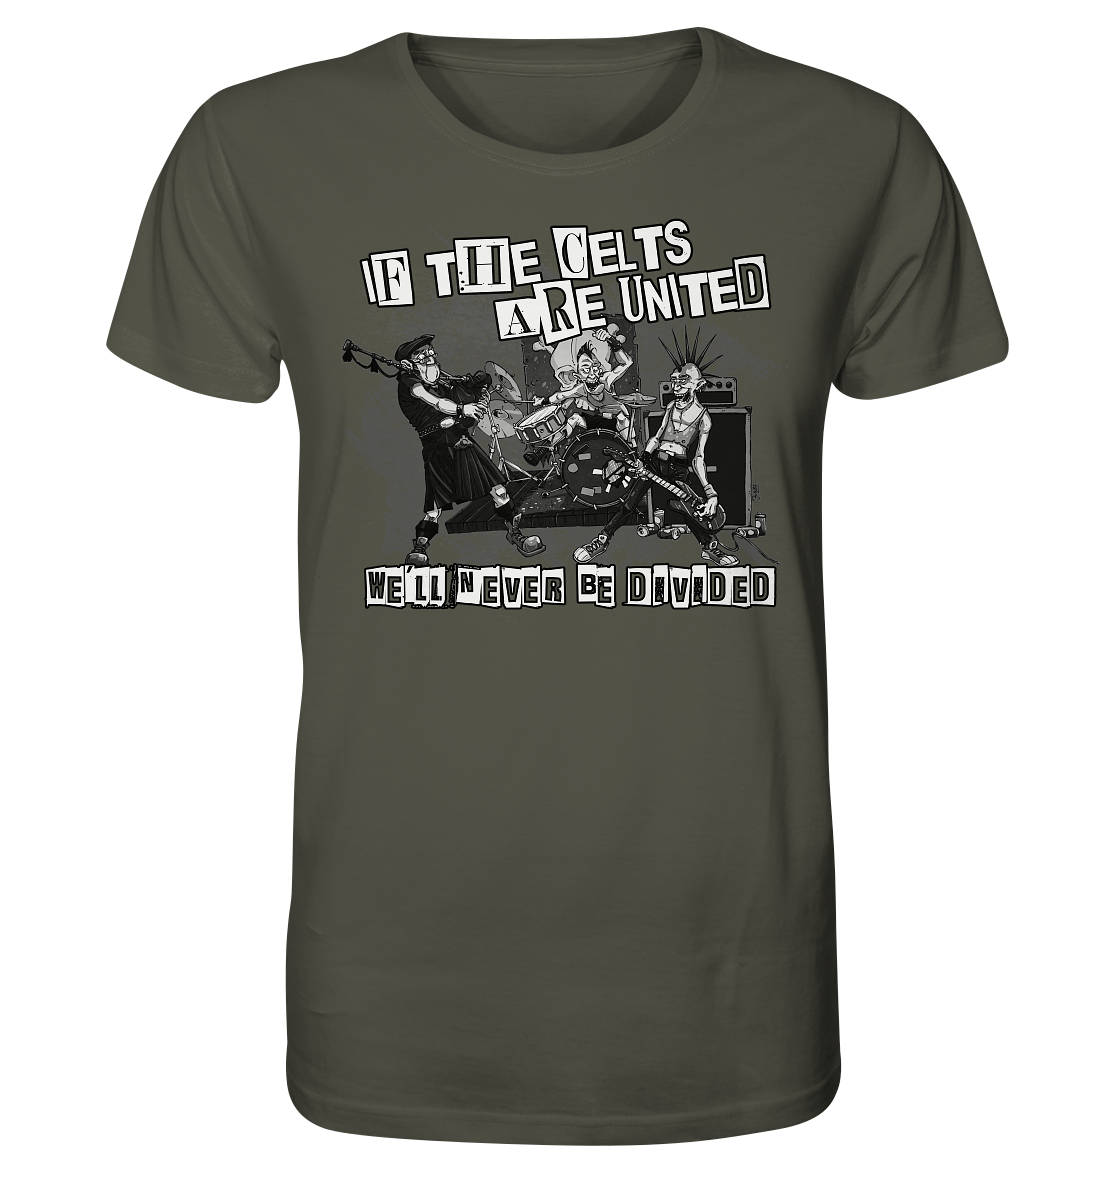 If The Celts Are United "We'll Never Be Divided" - Organic Shirt